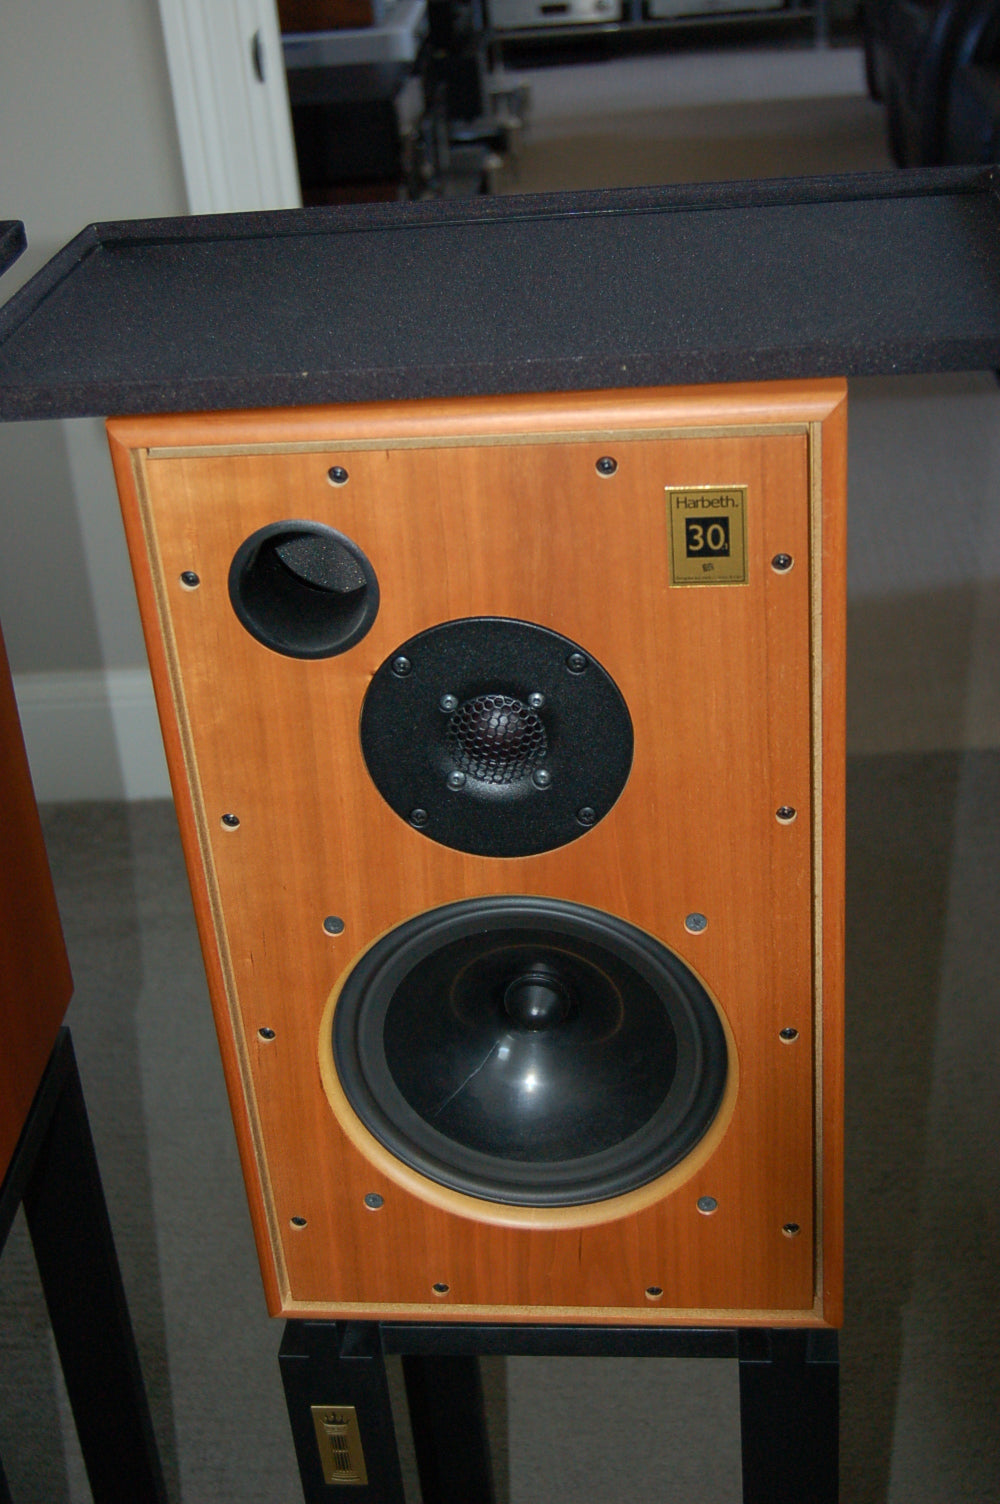 Harbeth 30.1 loudspeakers with matching stands (cherry wood)